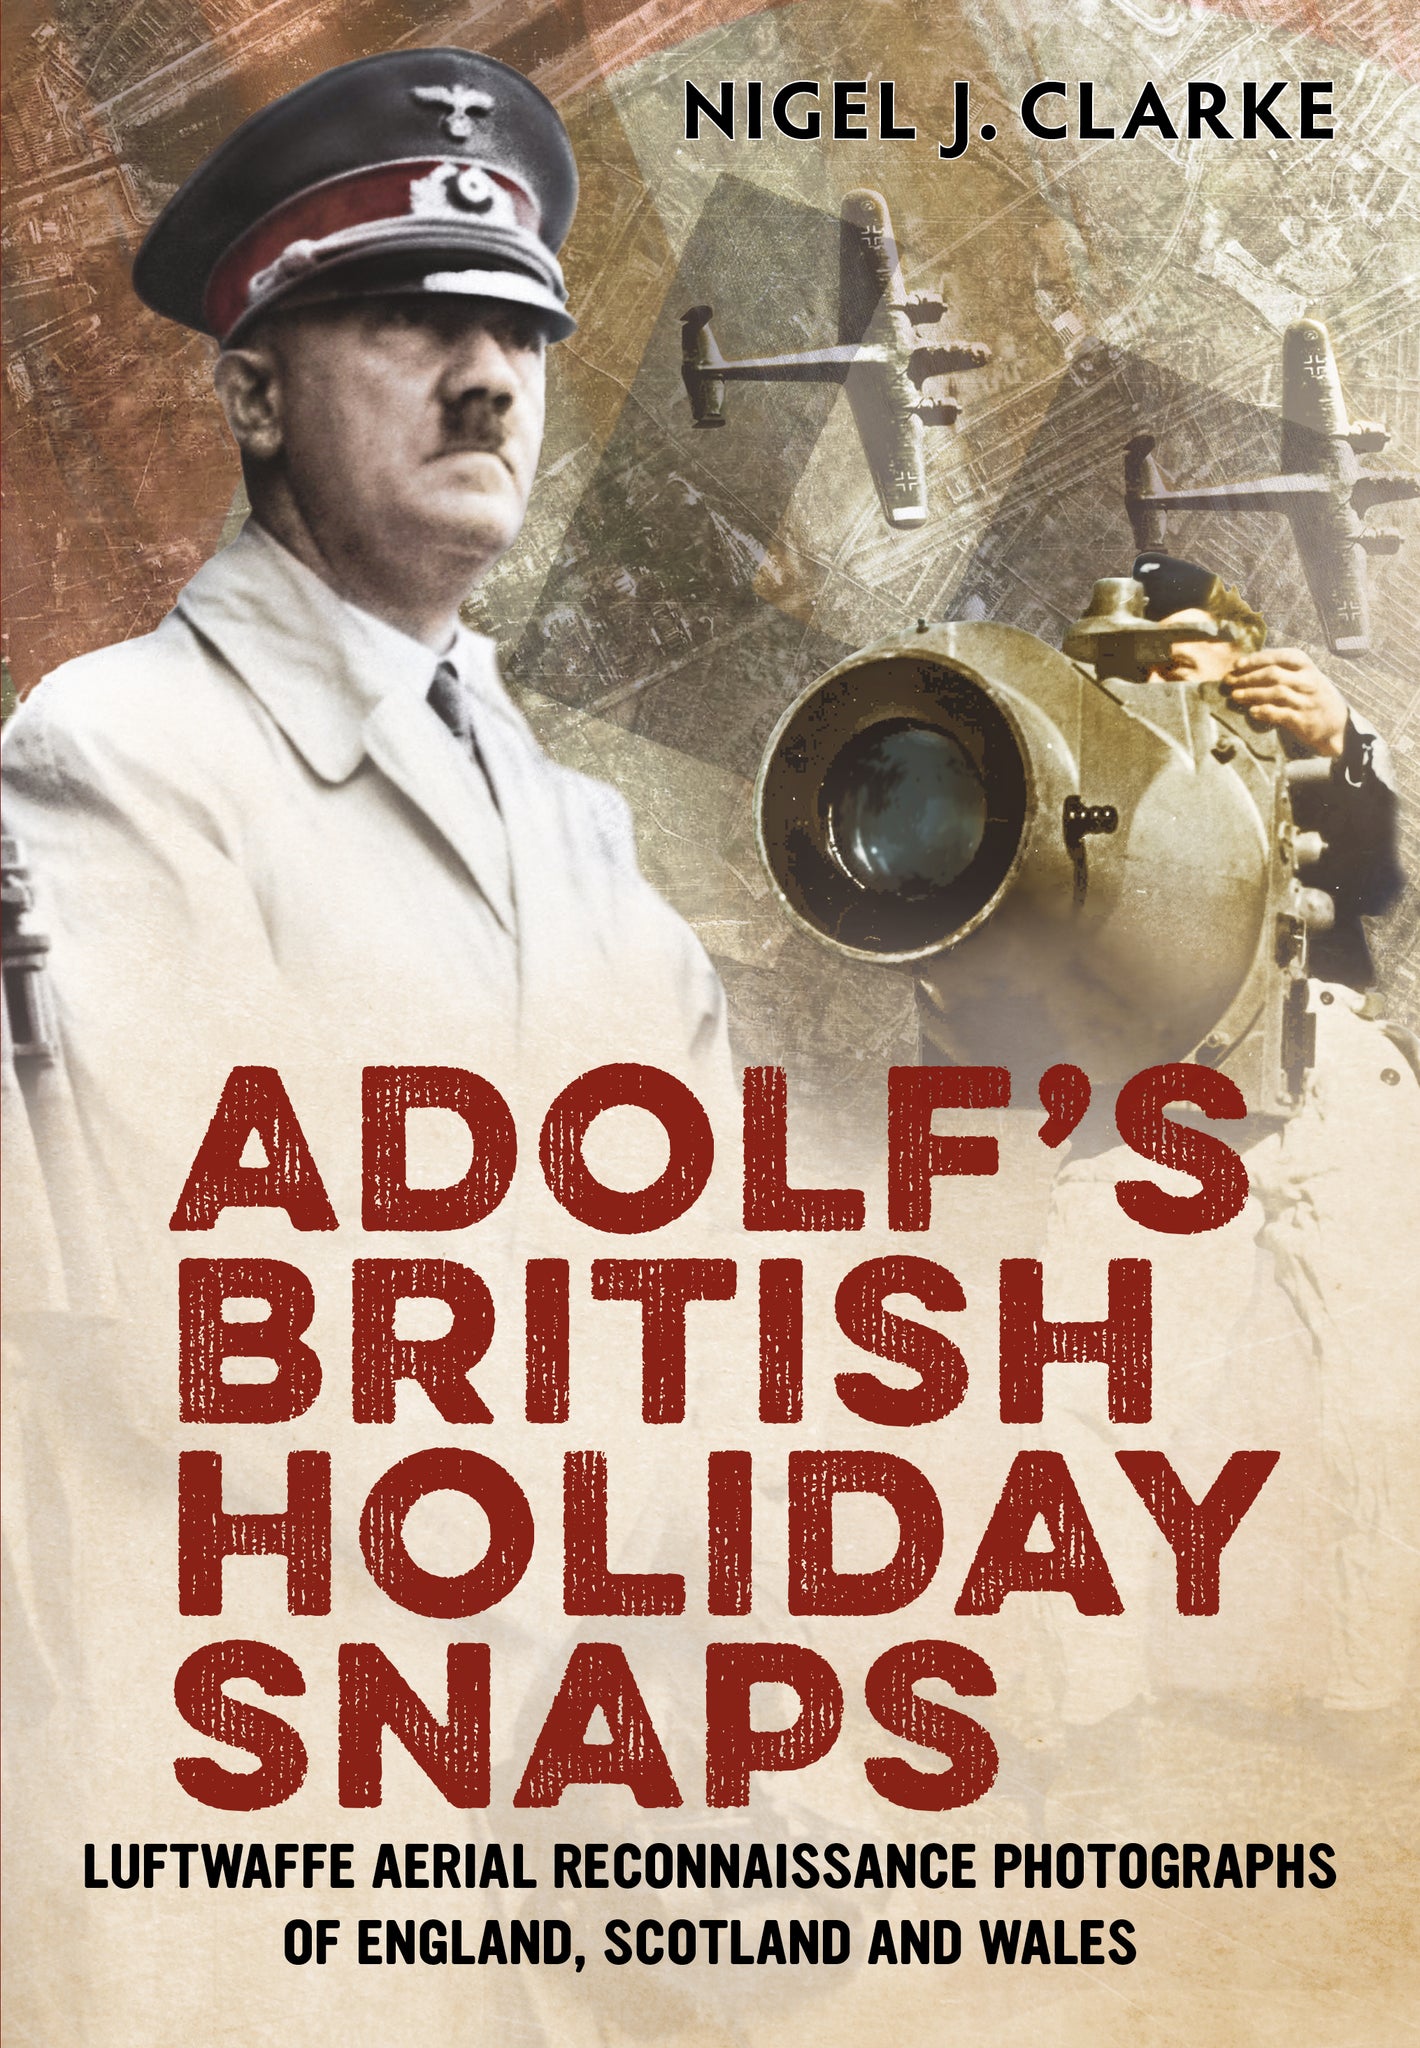 Adolf's British Holiday Snaps: Luftwaffe Aerial Reconnaissance of Great Britain (paperback) - available now from Fonthill Media